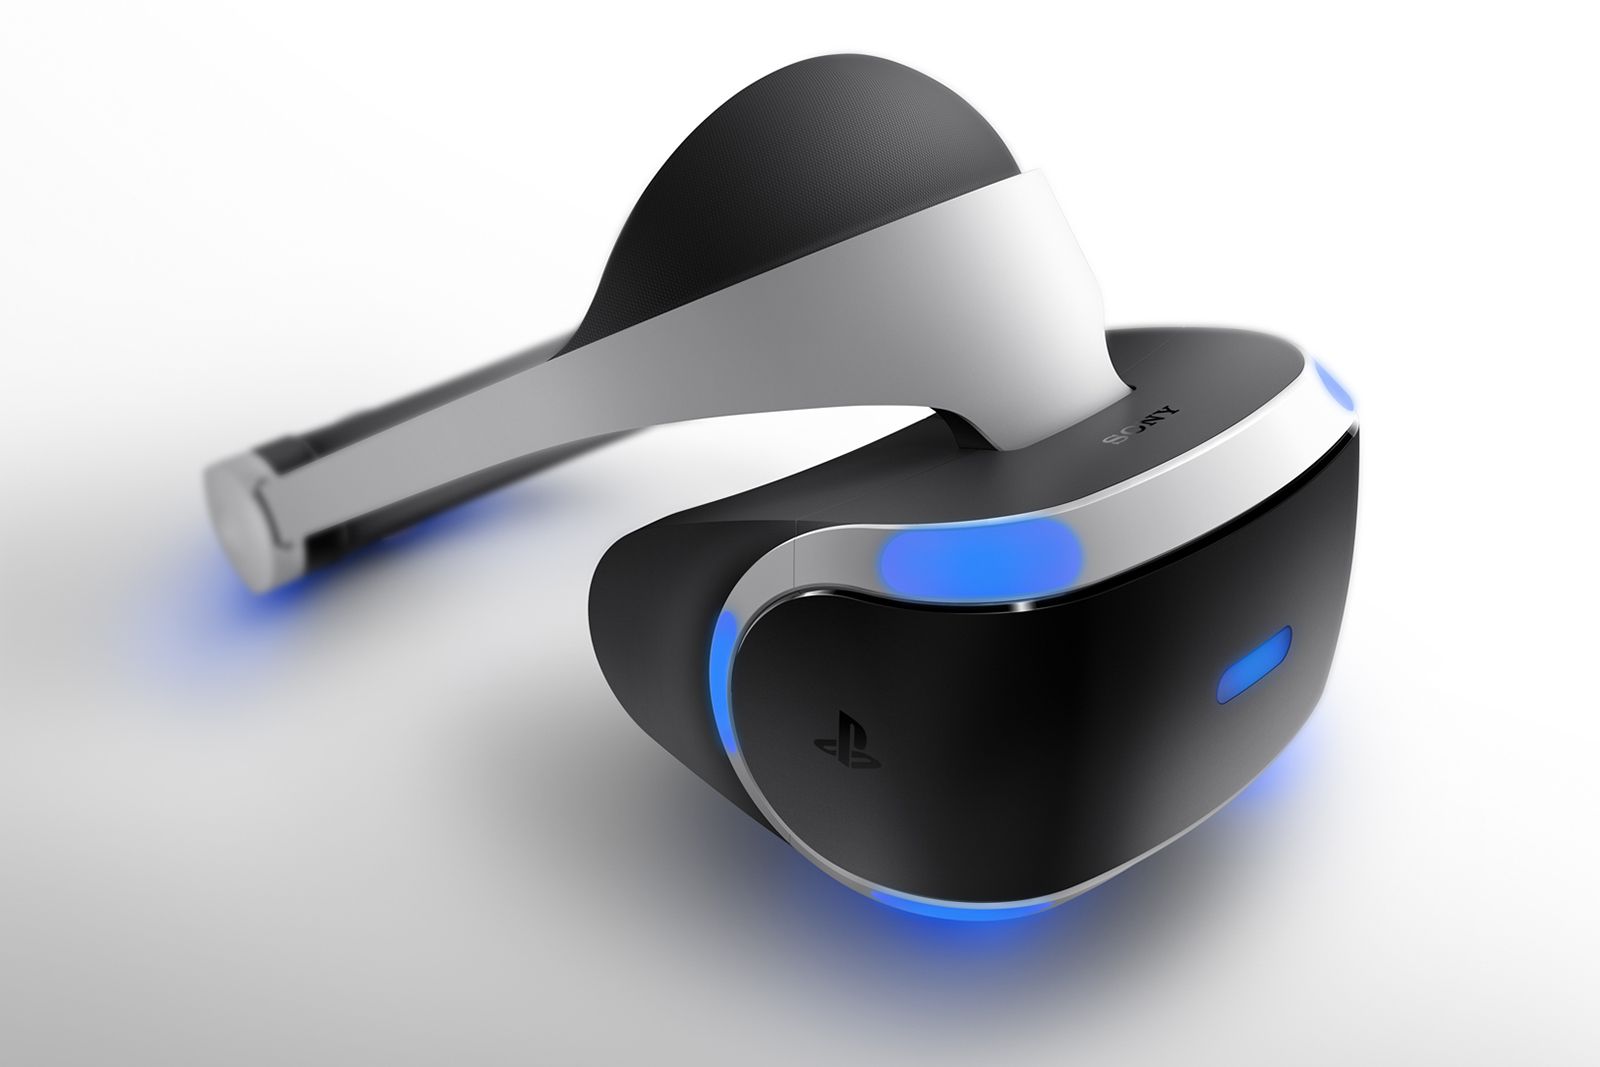 playstation vr not suitable for under 12s beat it pipsqueaks image 1